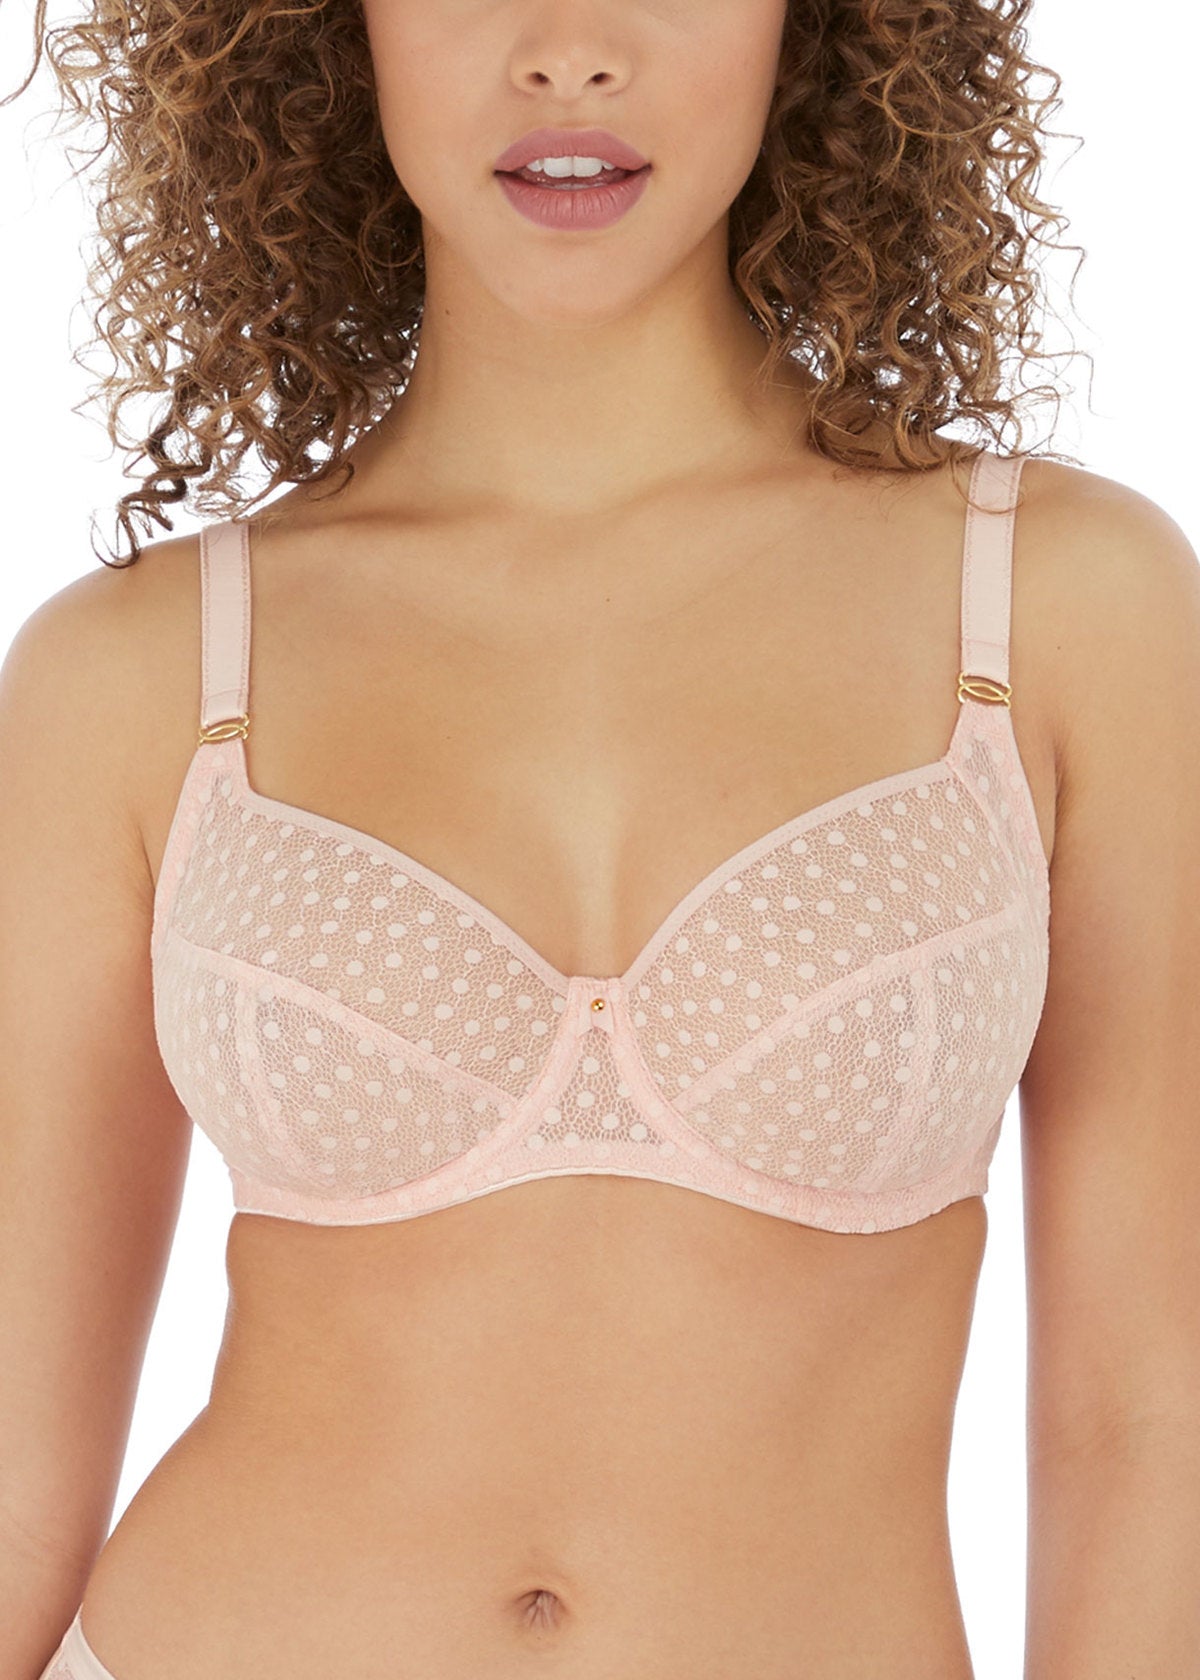 Starlight Side Support Balcony Bra (GG - K Cup) - Rosewater